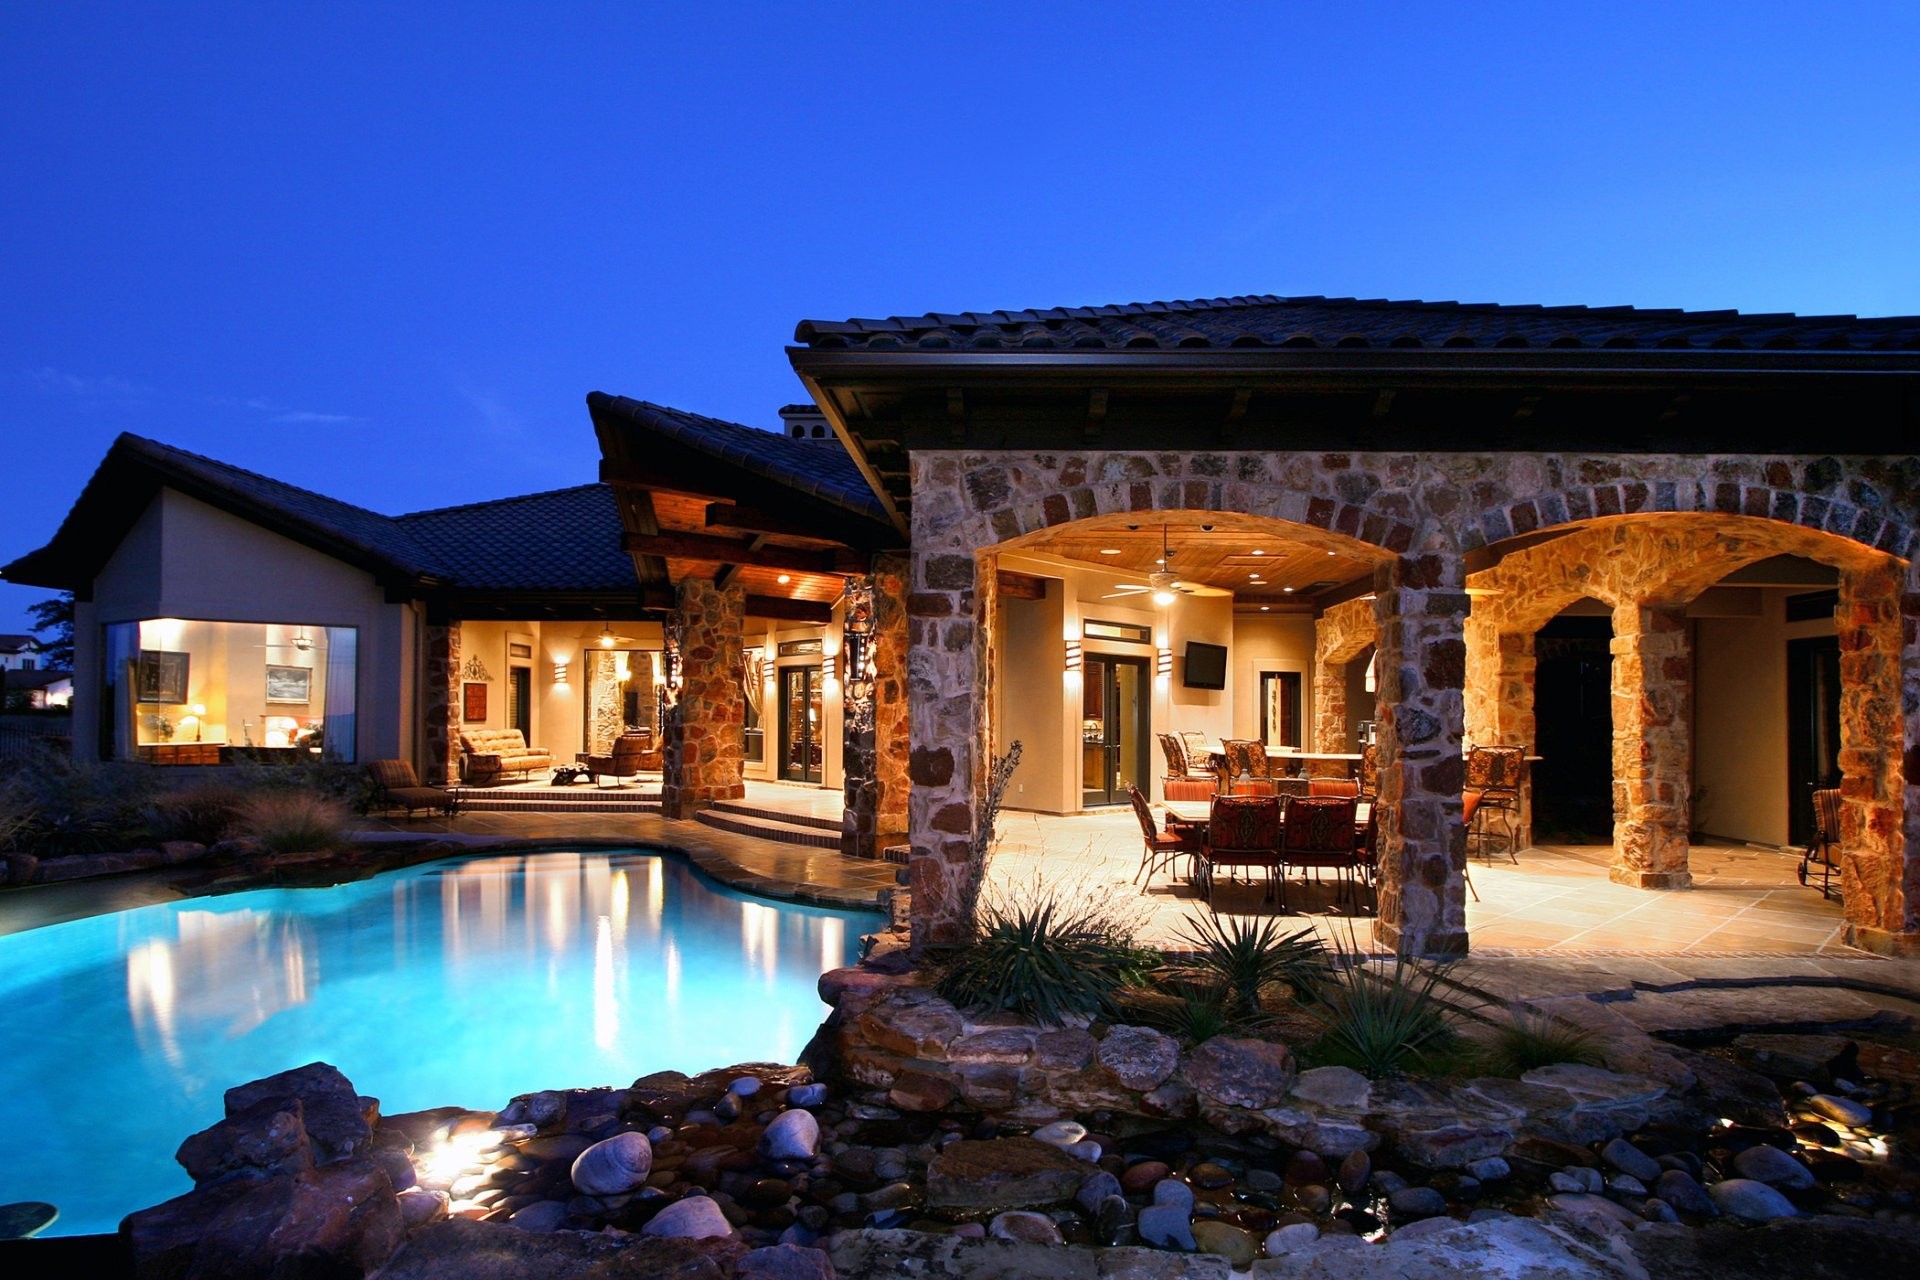 1920x1280 Good Texas Hill Country Home Builders #5:  Exterior-interior-home-house-pool-house-stone-pool-tv-table-chairs-bar-bar.jpg